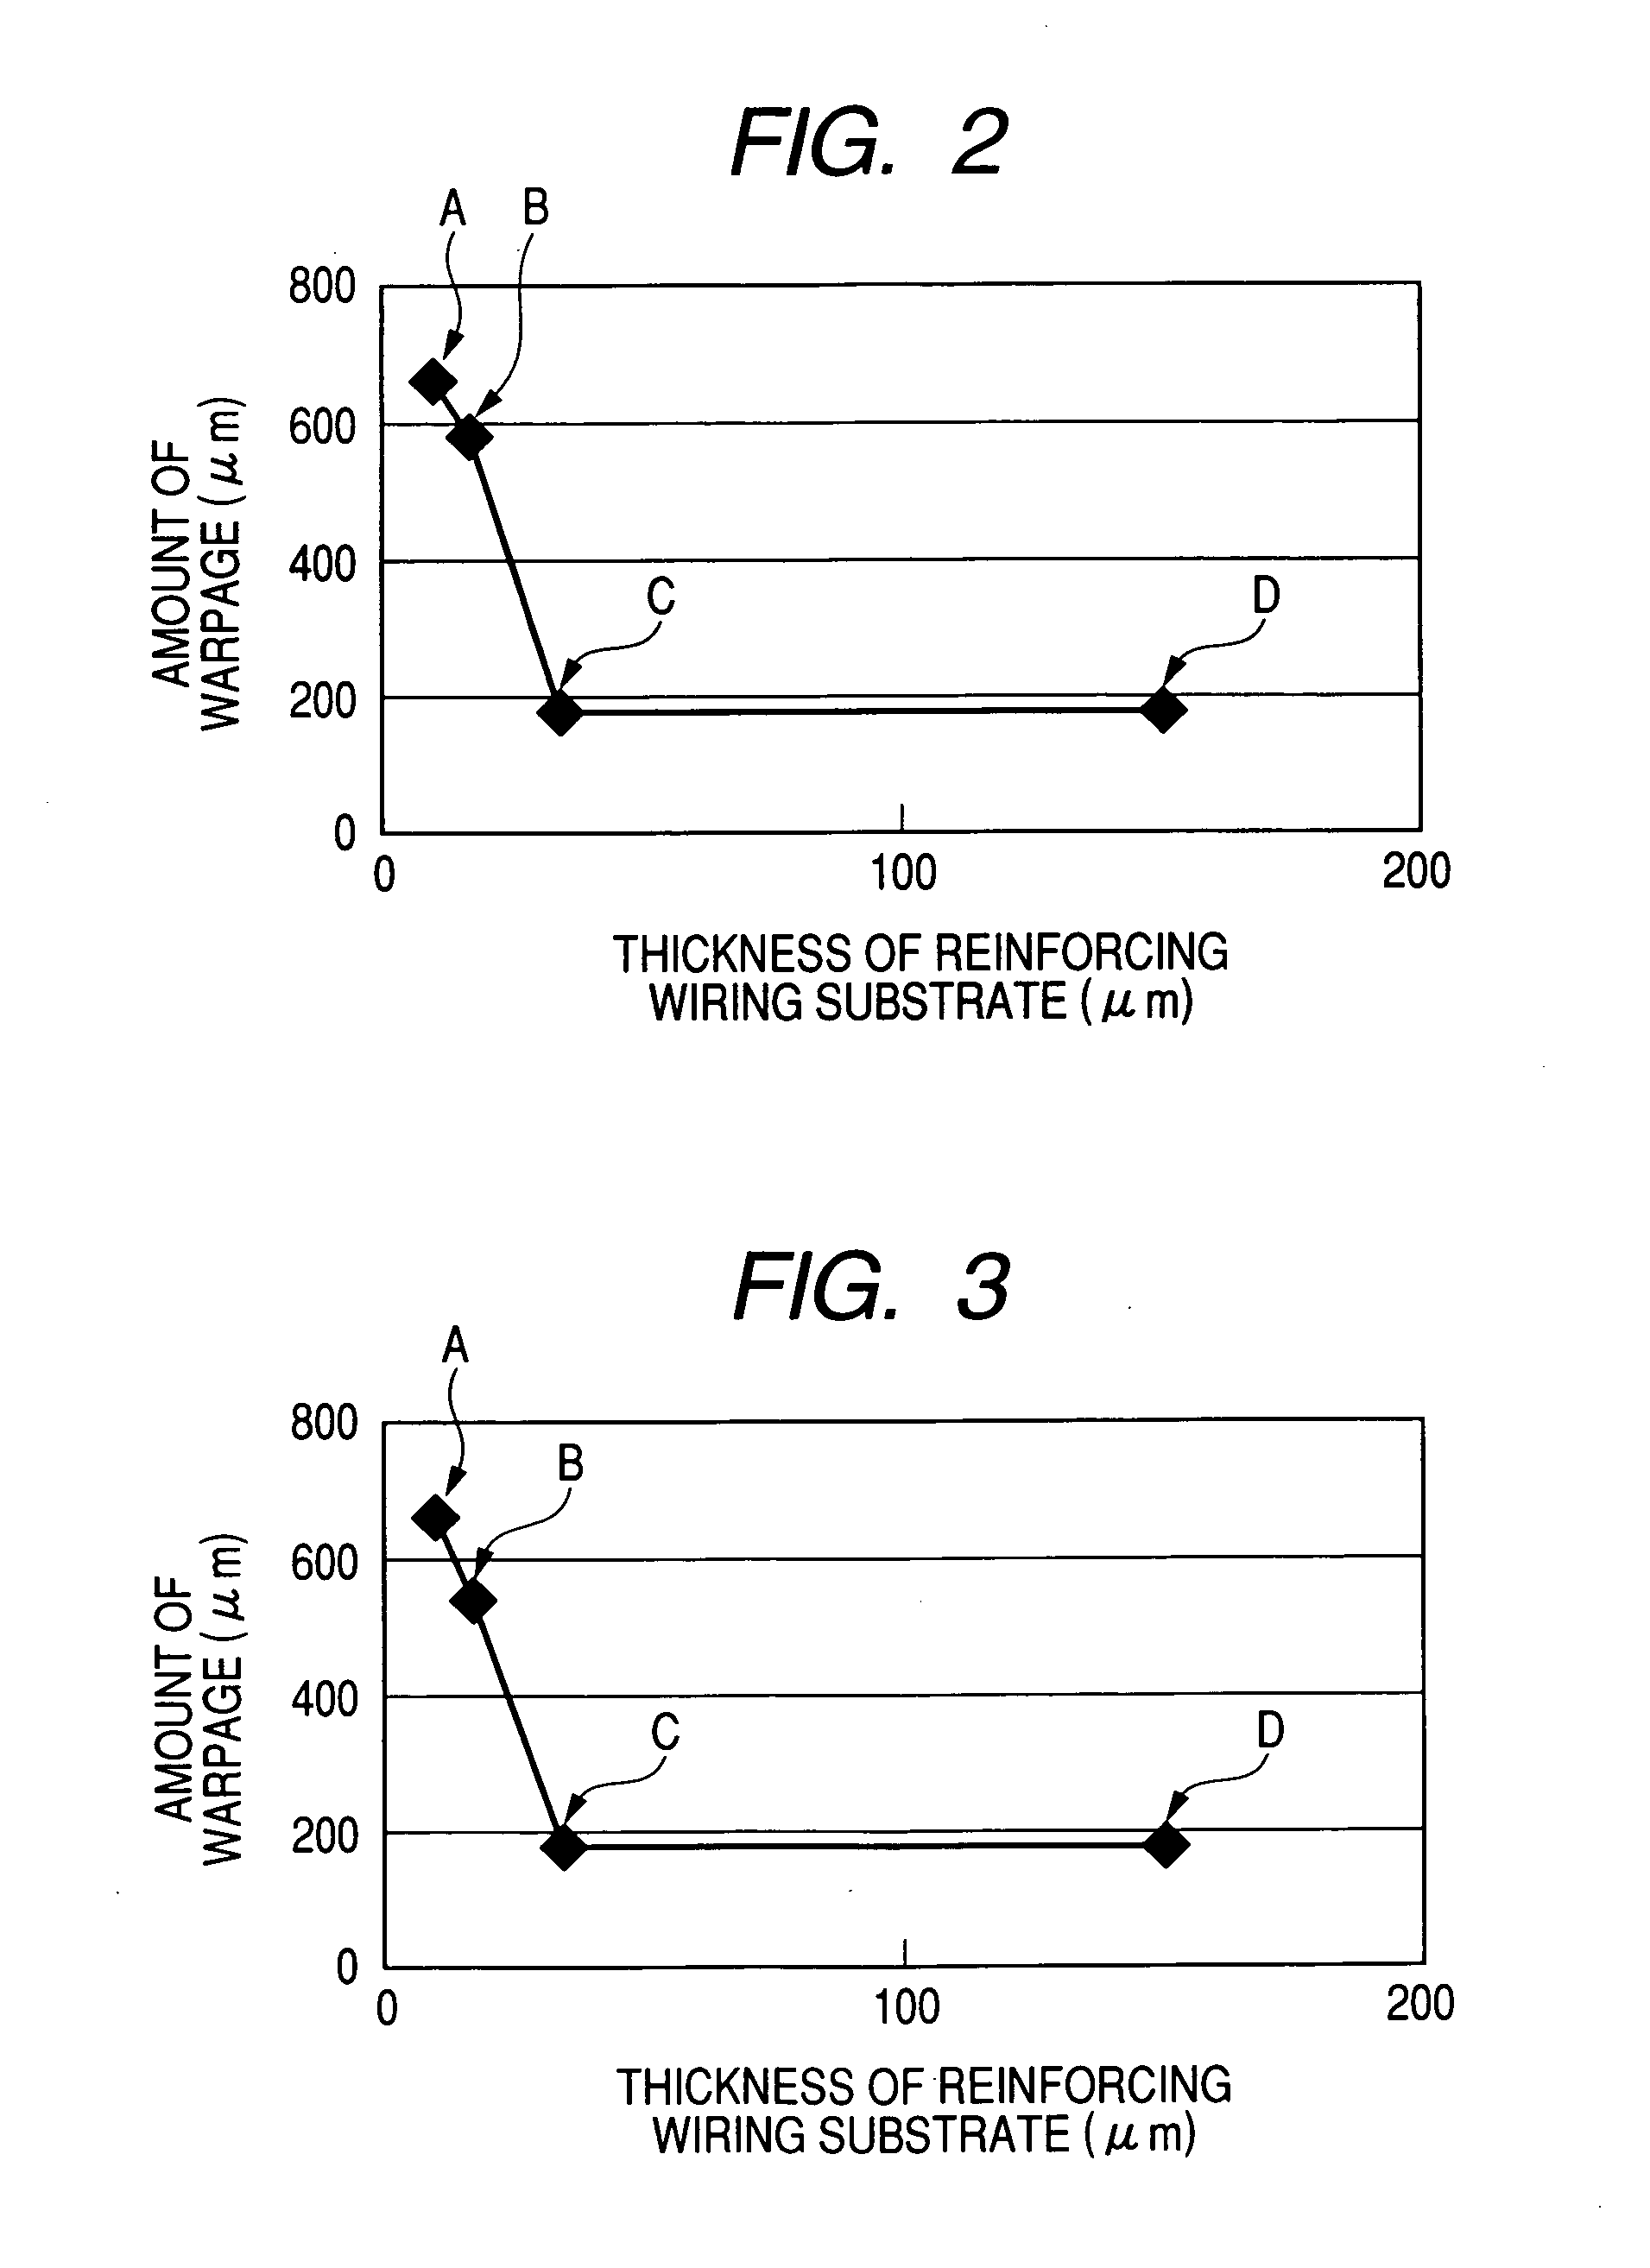 Multilayered wiring substrate and method of manufacturing the same